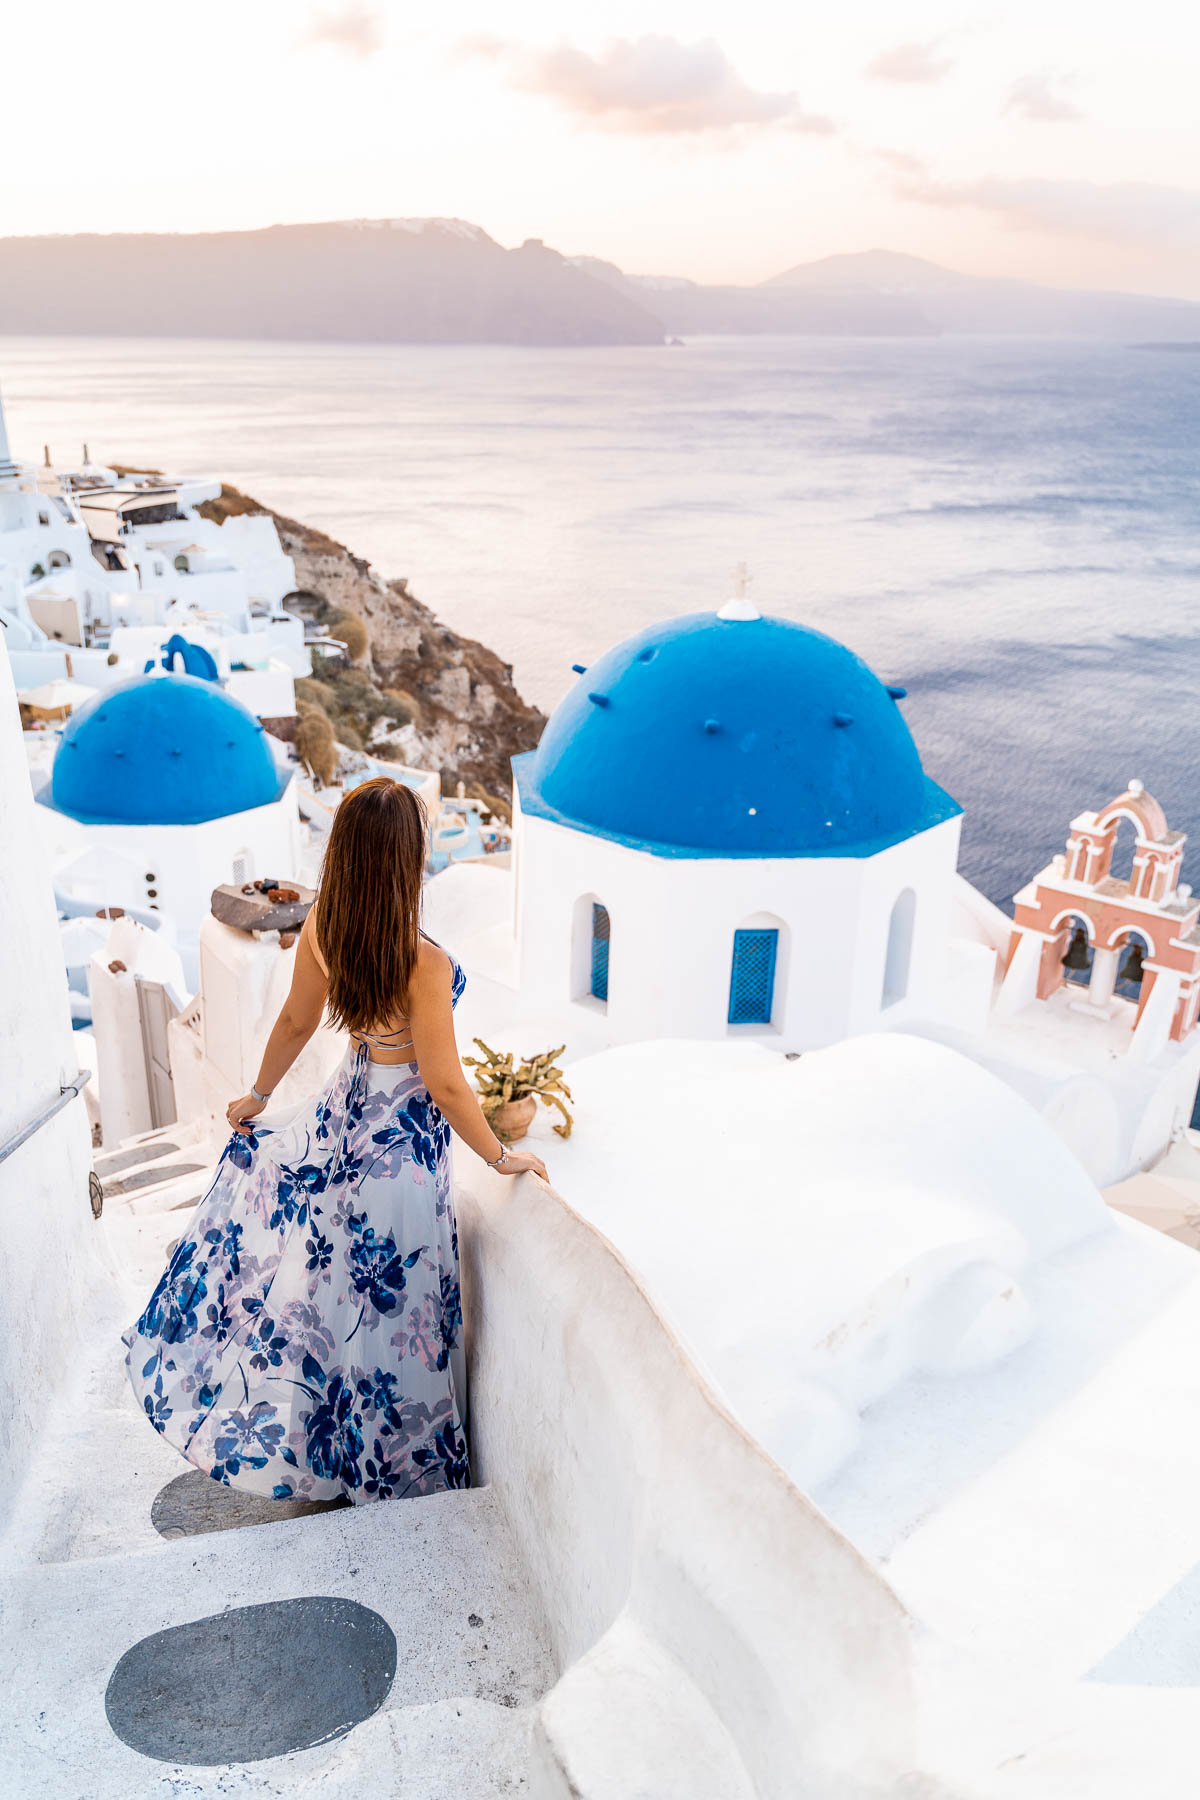 Girl in a blue dress standing in front of the three domes in Oia, Santorini